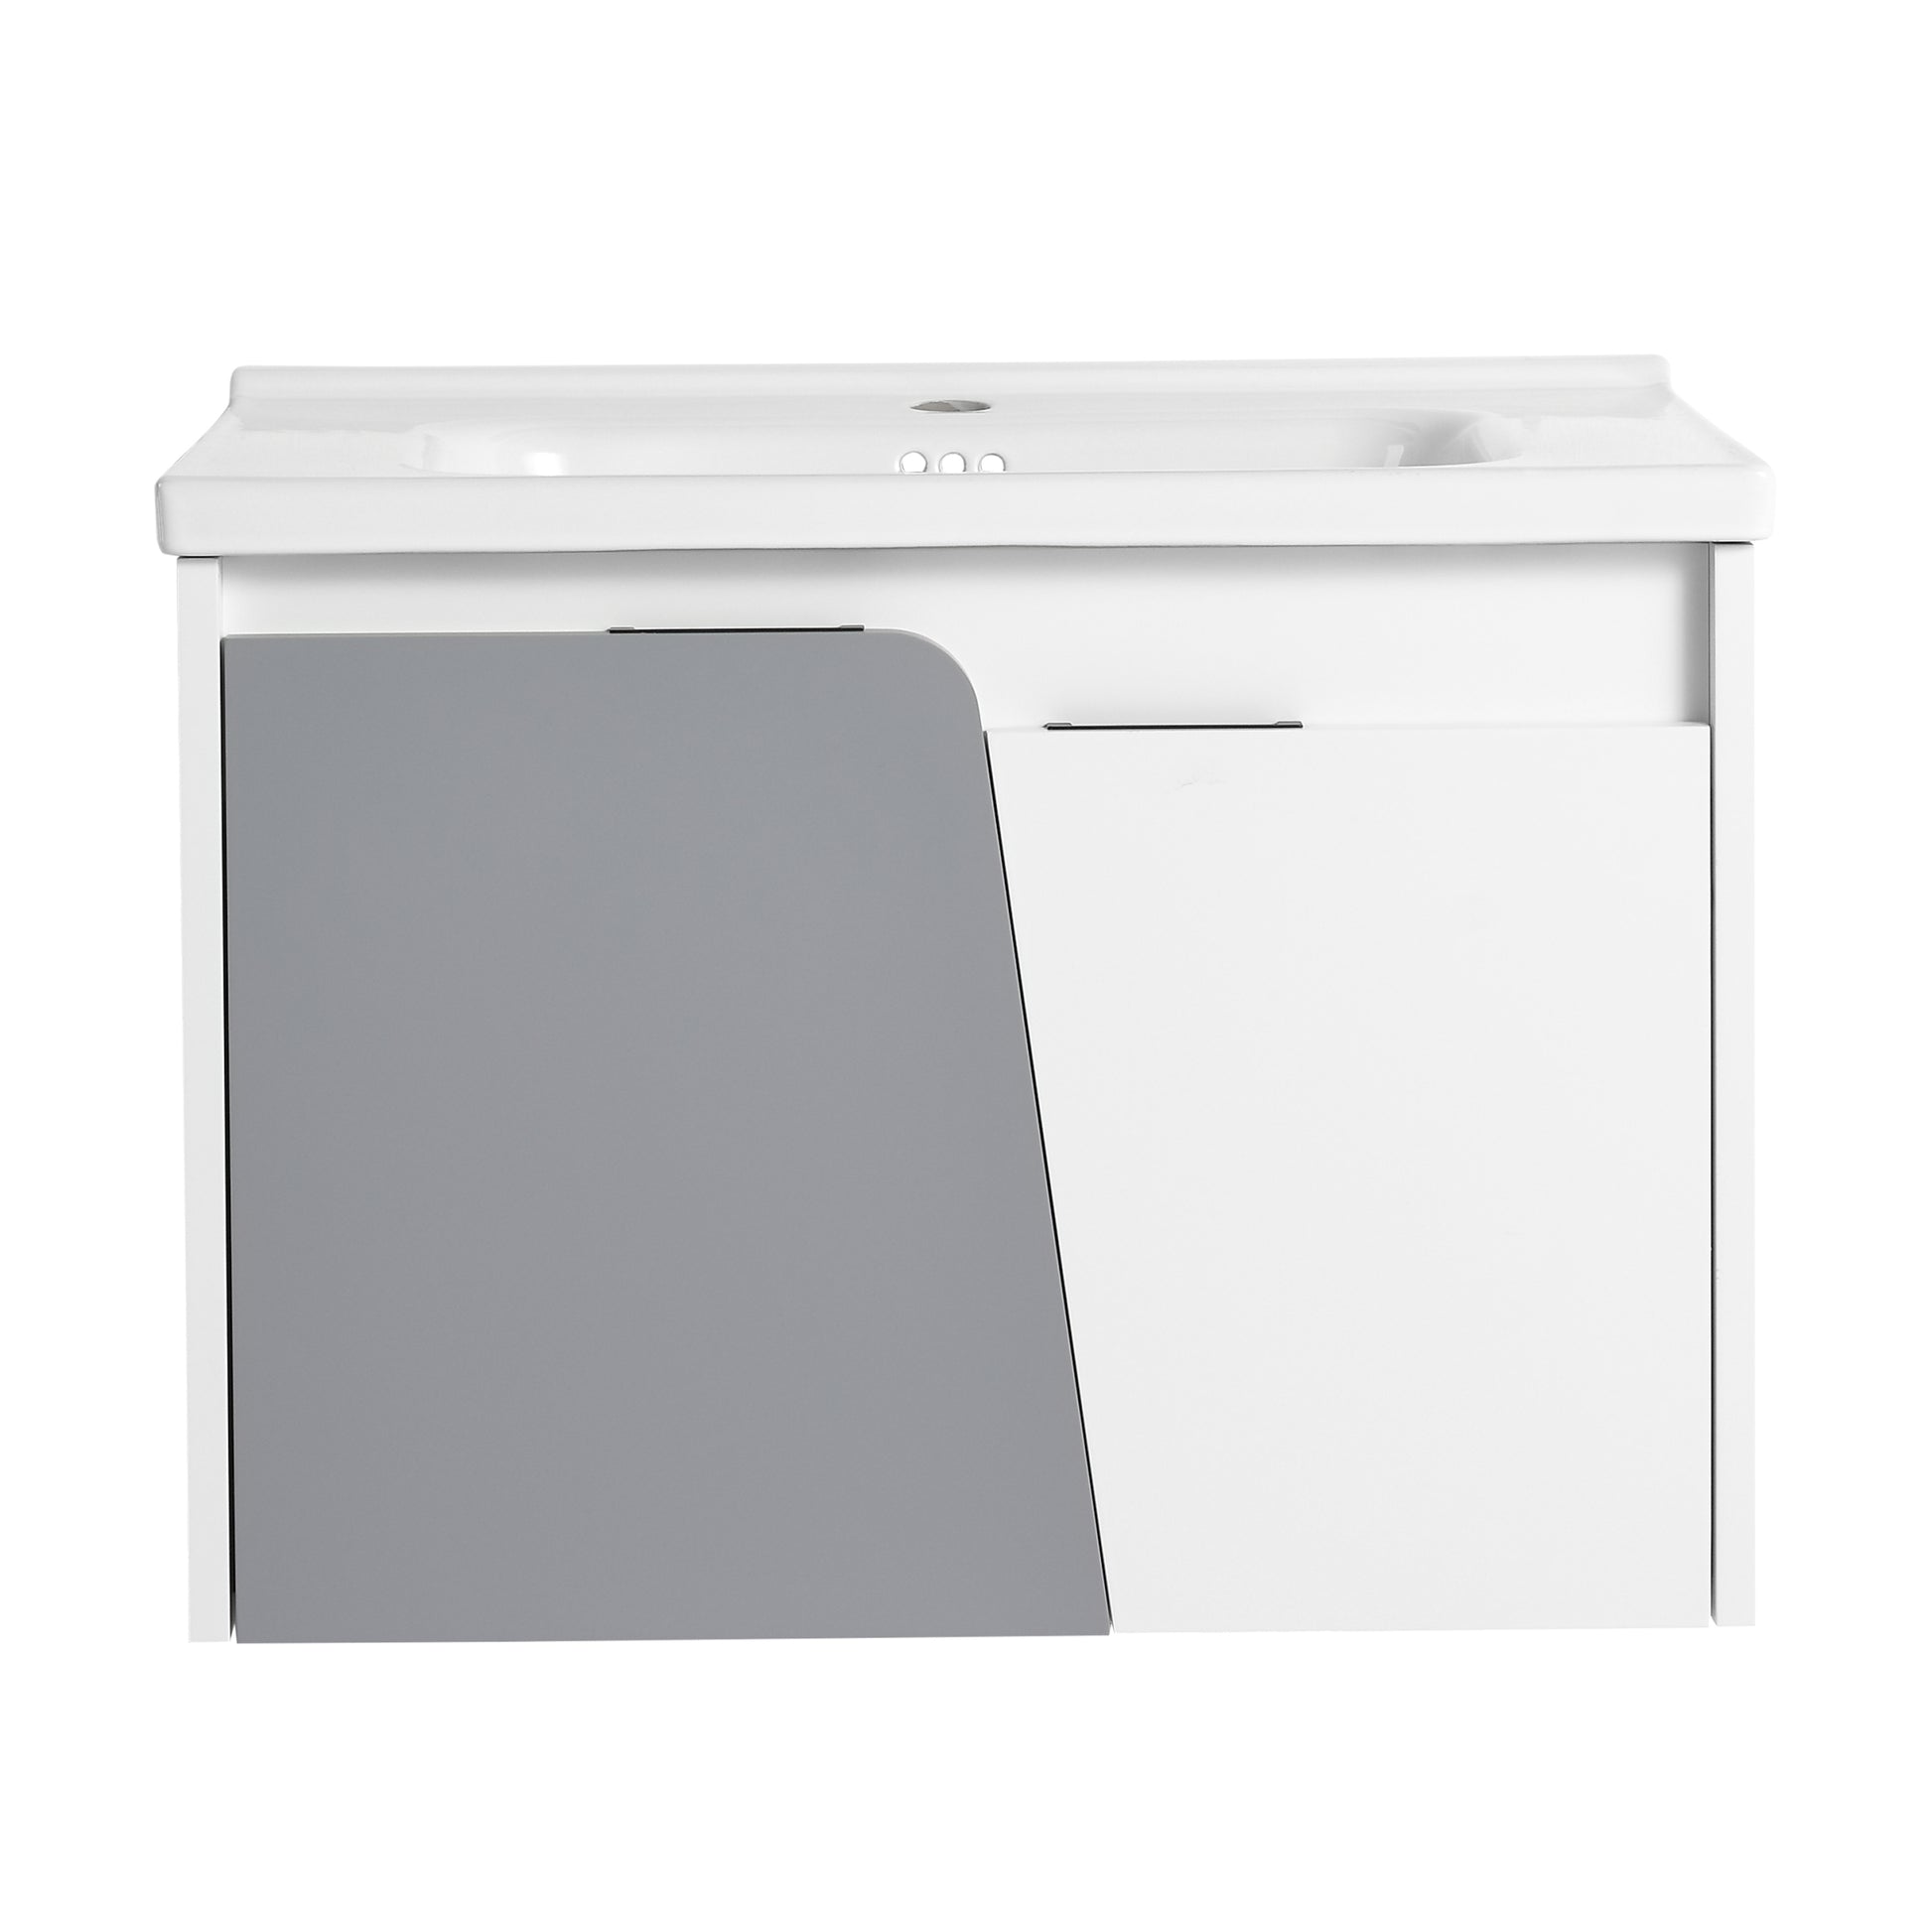 28 Inch Wall Mounted Bathroom Vanity With Sink, For white-2-bathroom-wall mounted-modern-plywood